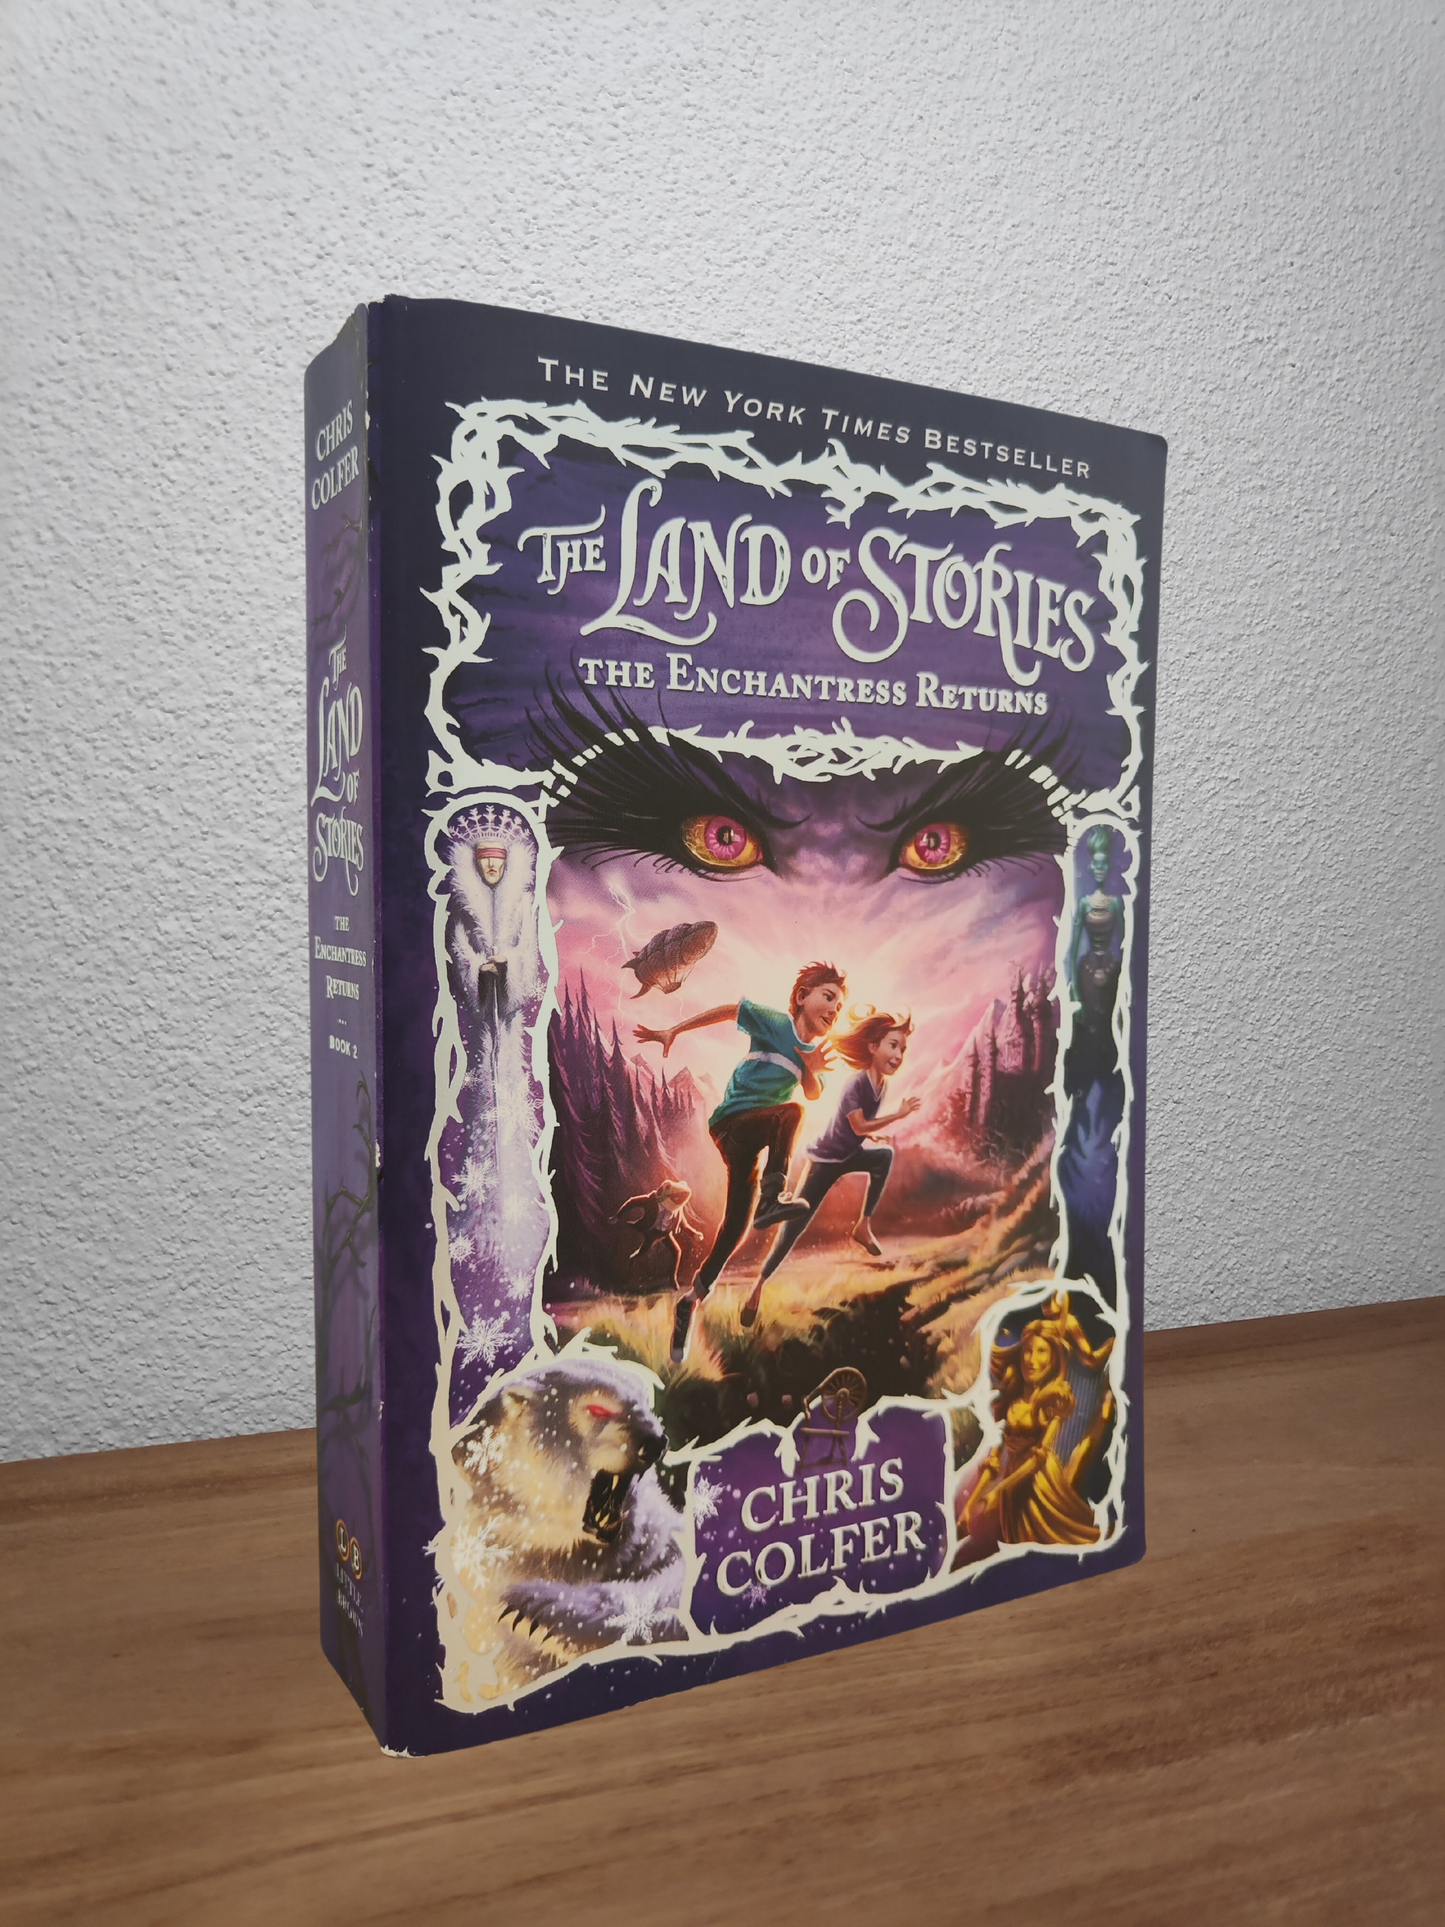 Chris Colfer - The Land of Stories: The Enchantress Returns #2